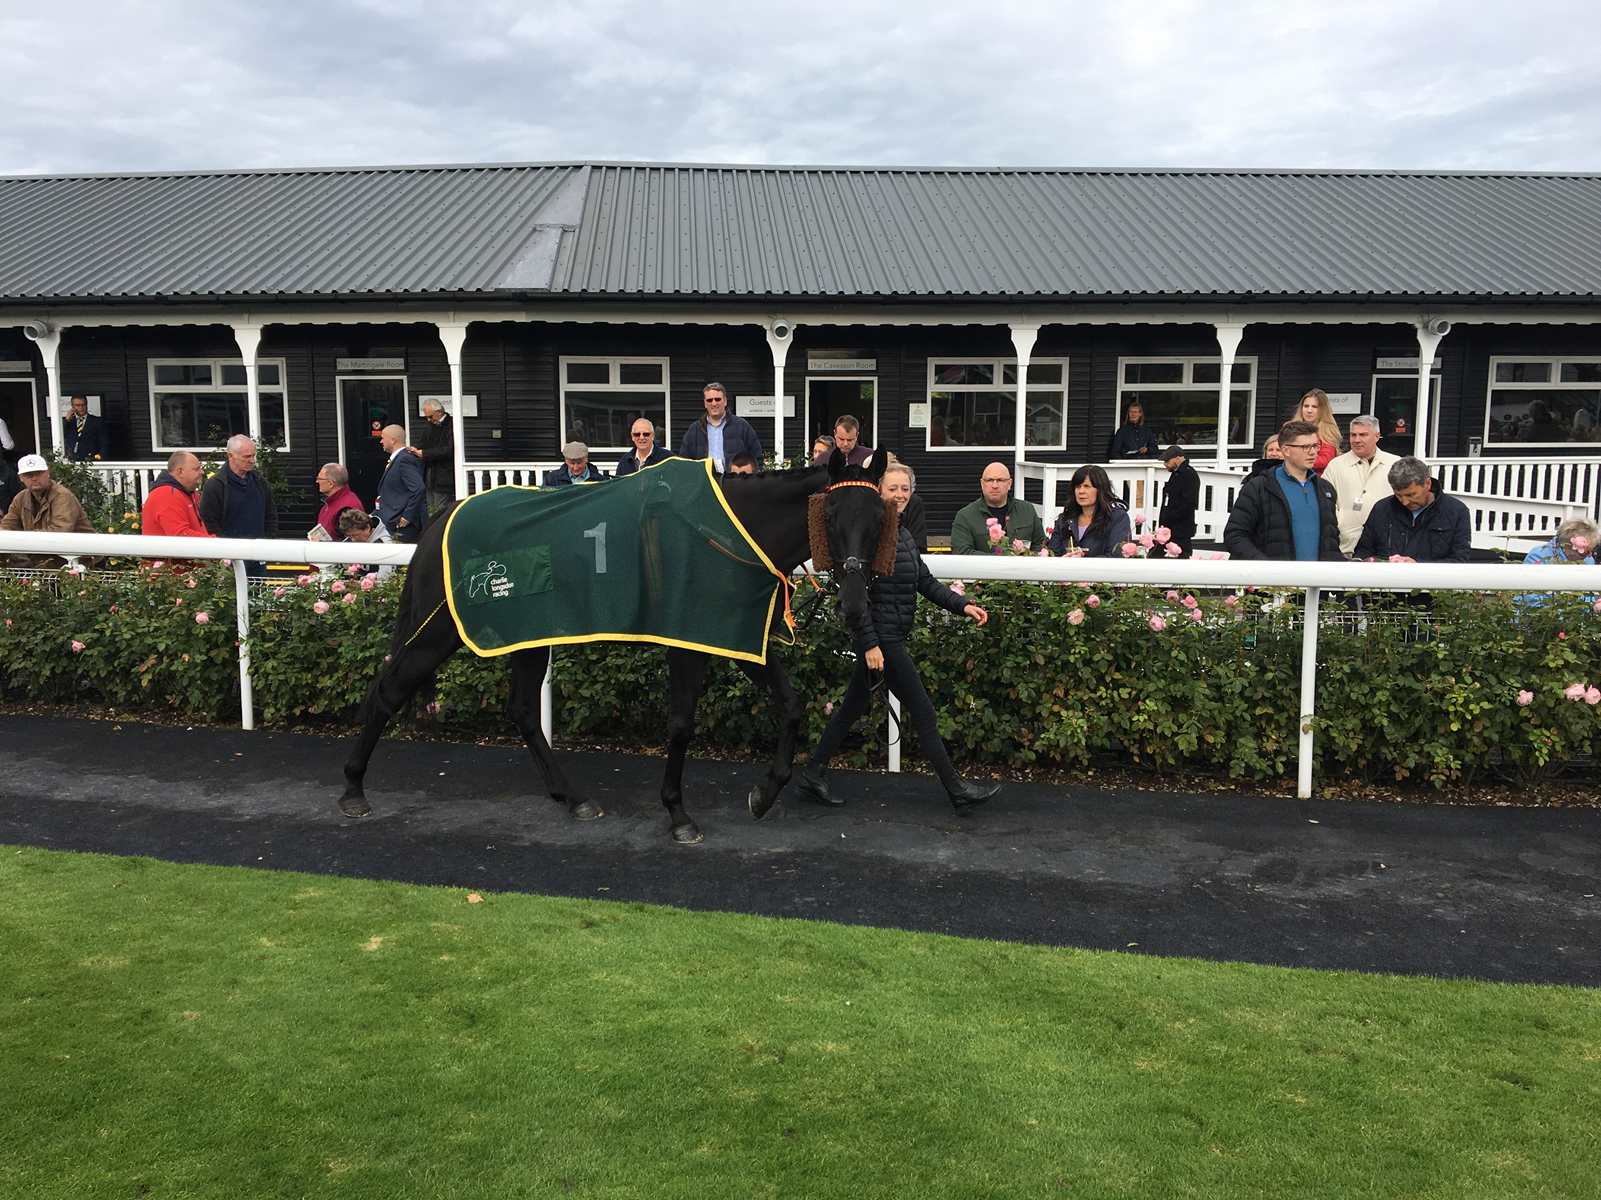 Azure Fly in the paddock at Uttoxeter in Sunday